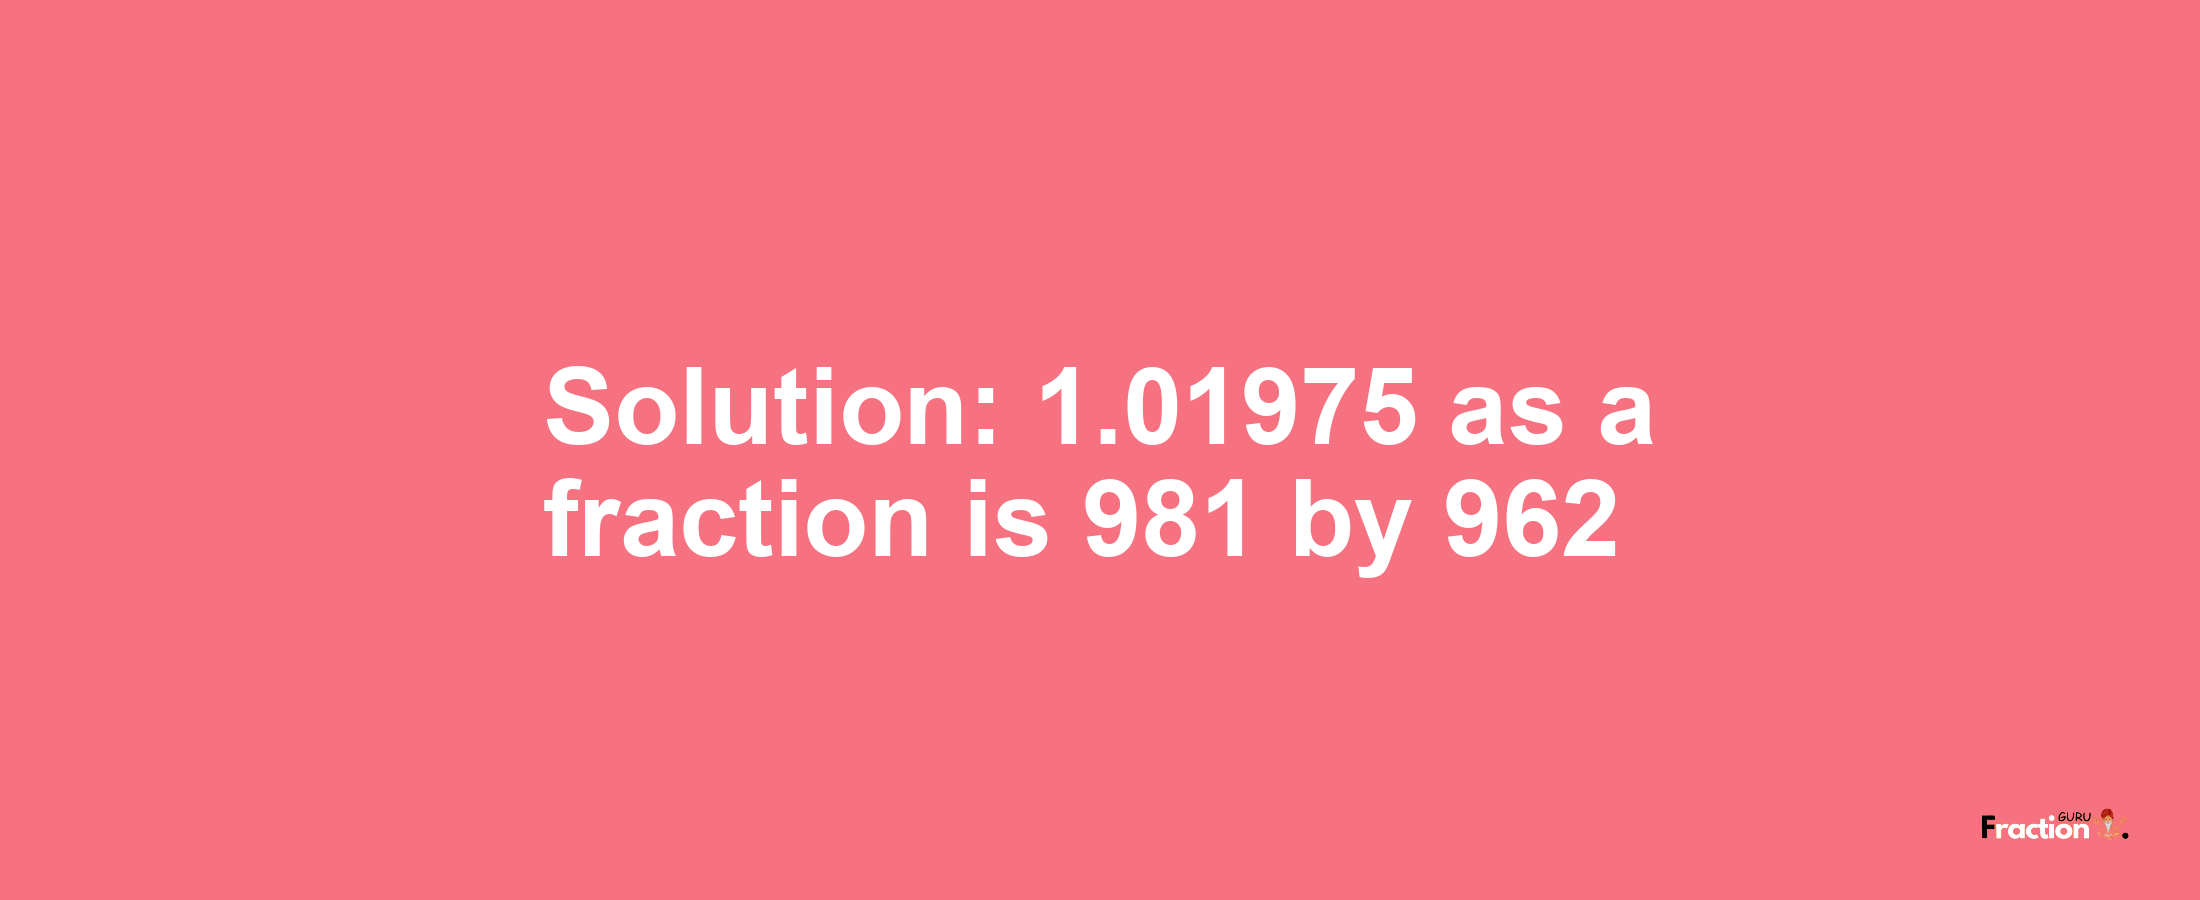 Solution:1.01975 as a fraction is 981/962